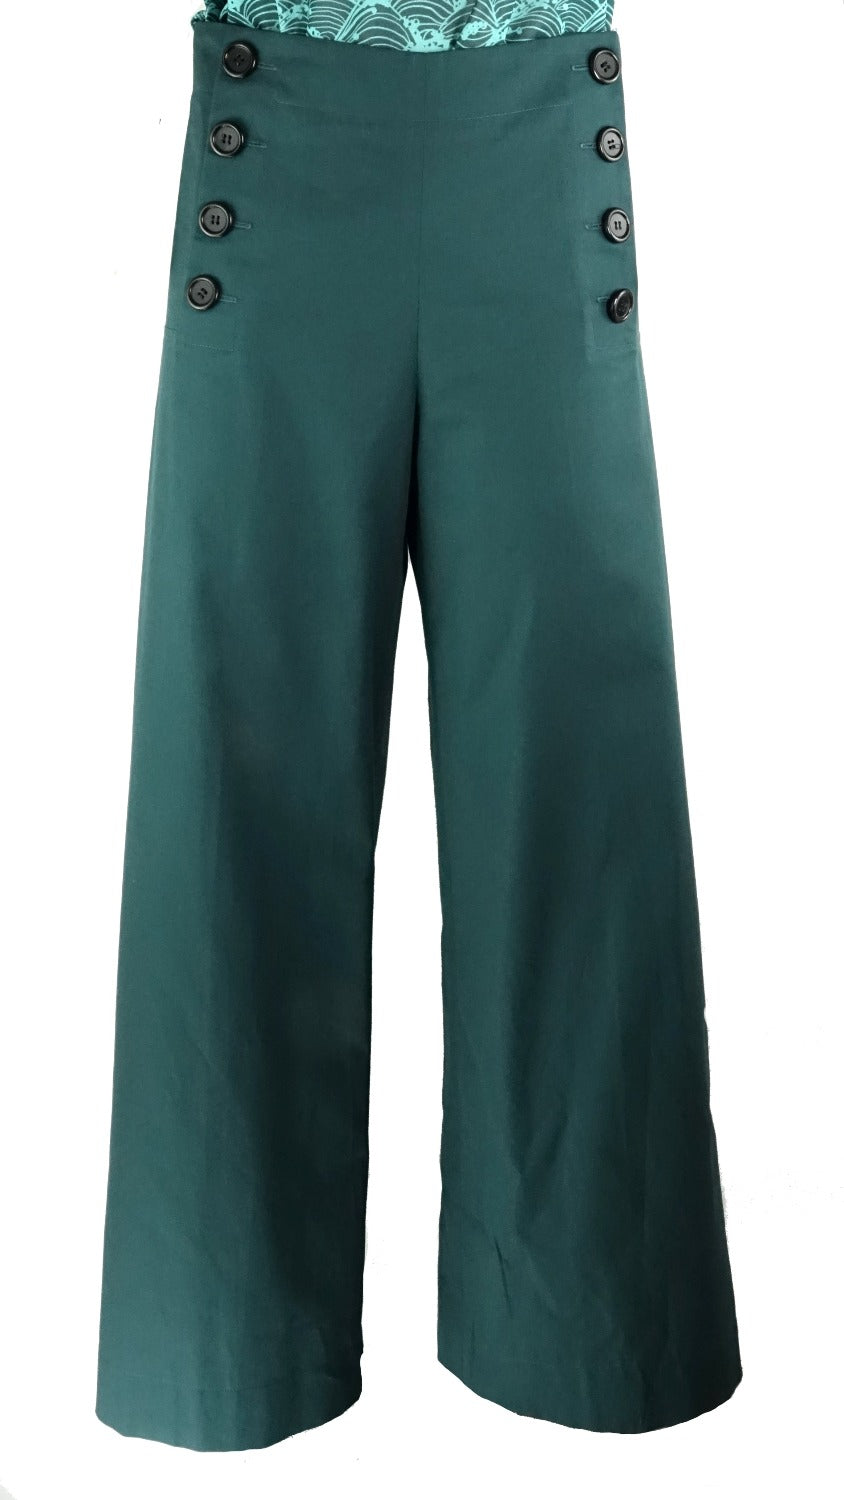 Marine trousers in green cotton